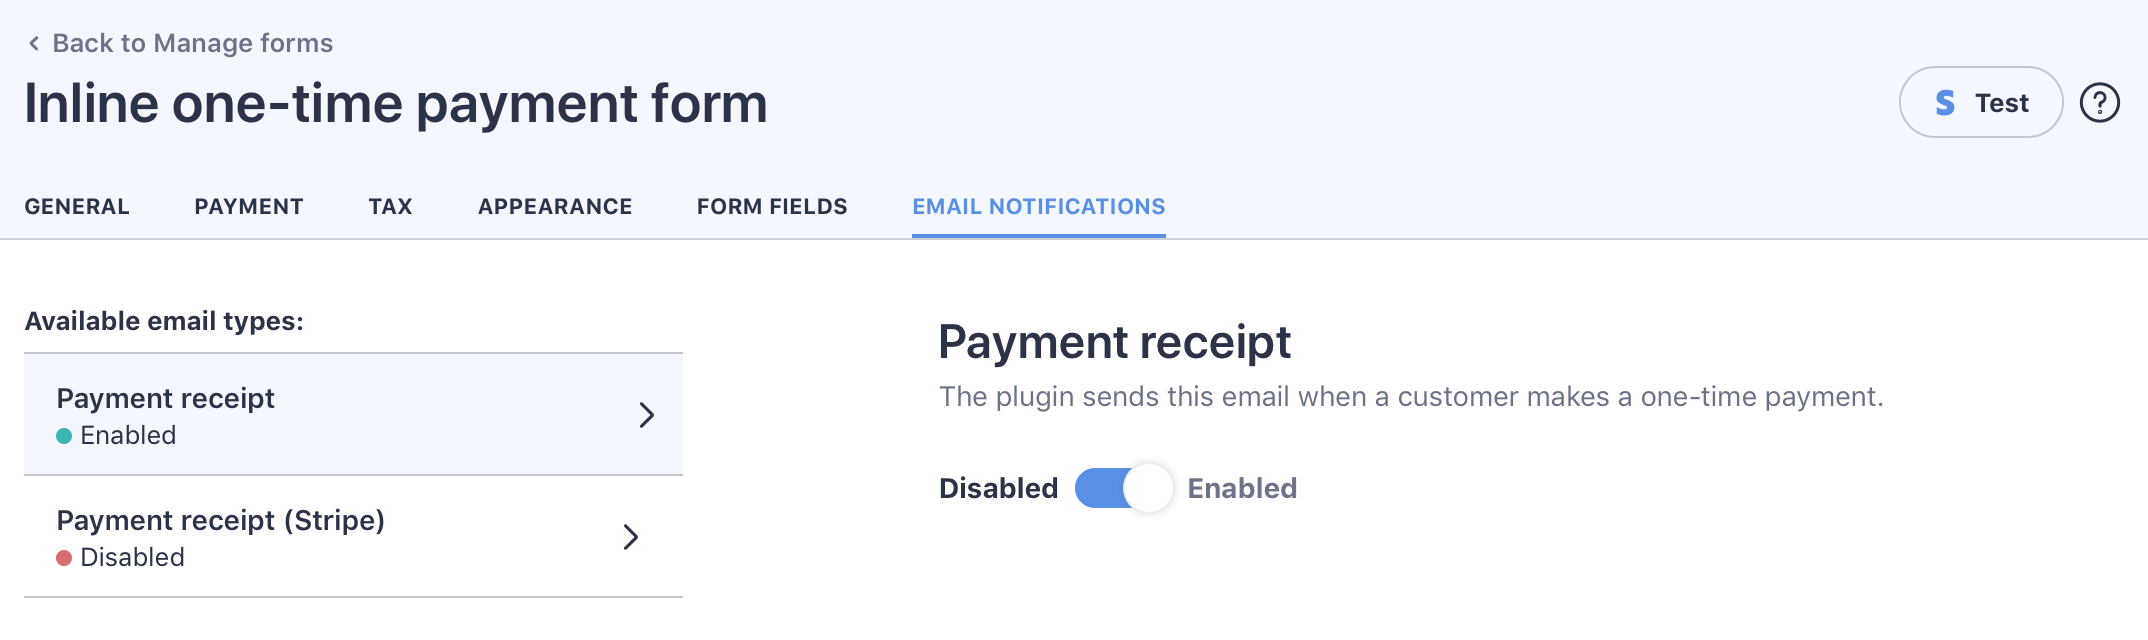 You can enable email receipts on the 'Email notification' tab of forms